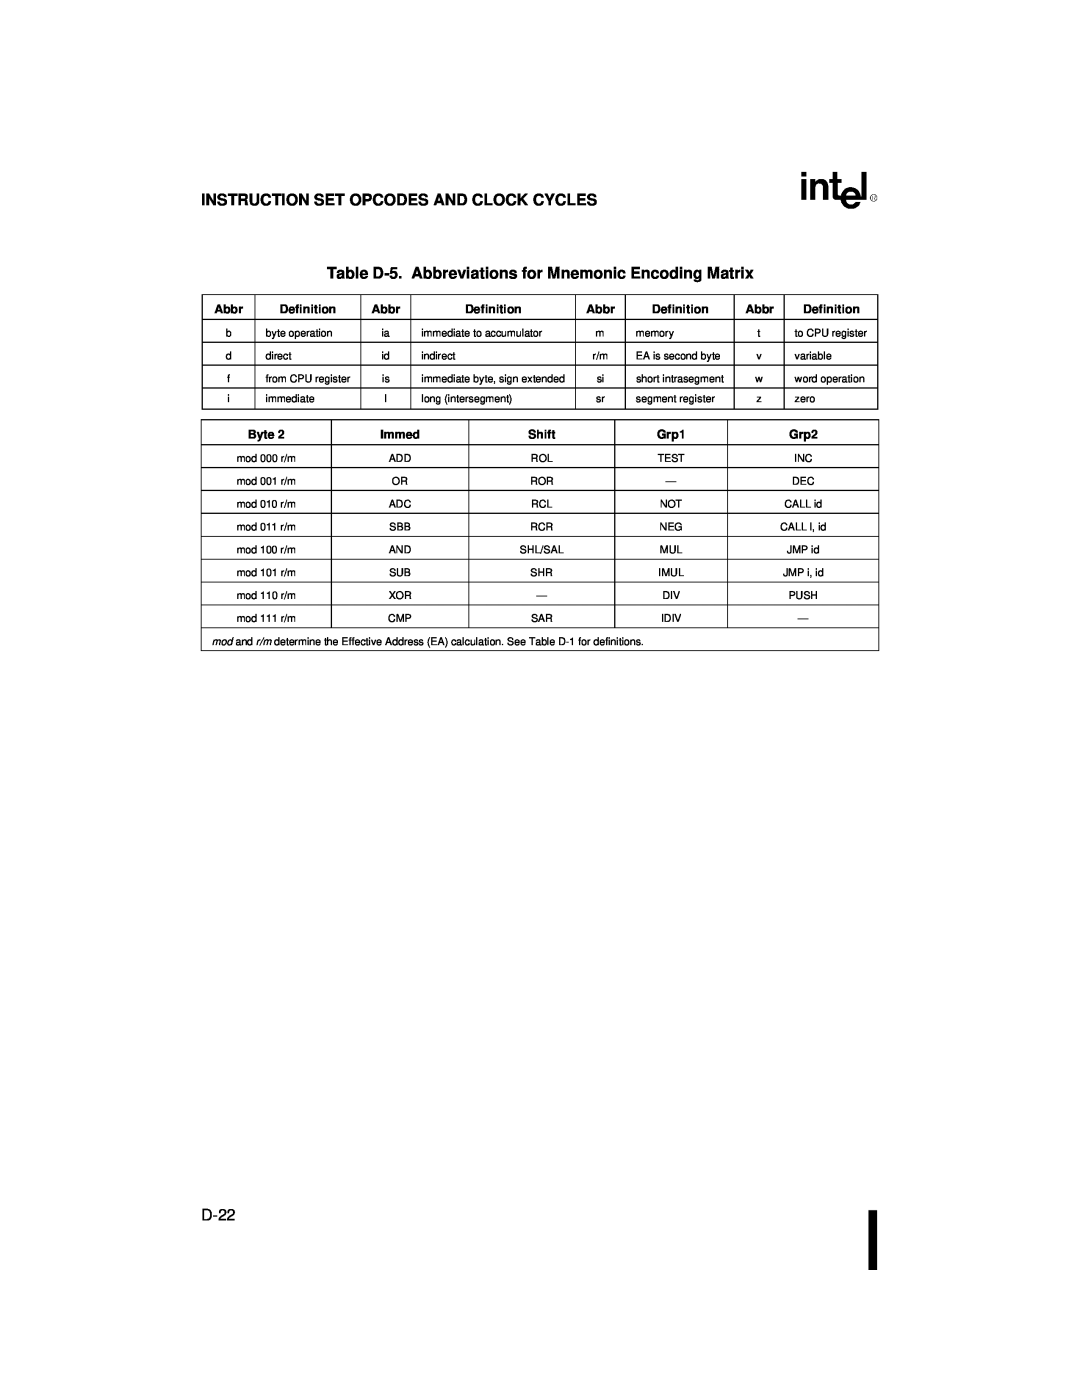 Intel 80C186XL, 80C188XL Instruction Set Opcodes And Clock Cycles, Abbr, Definition, Byte, Immed, Shift, Grp1, Grp2 